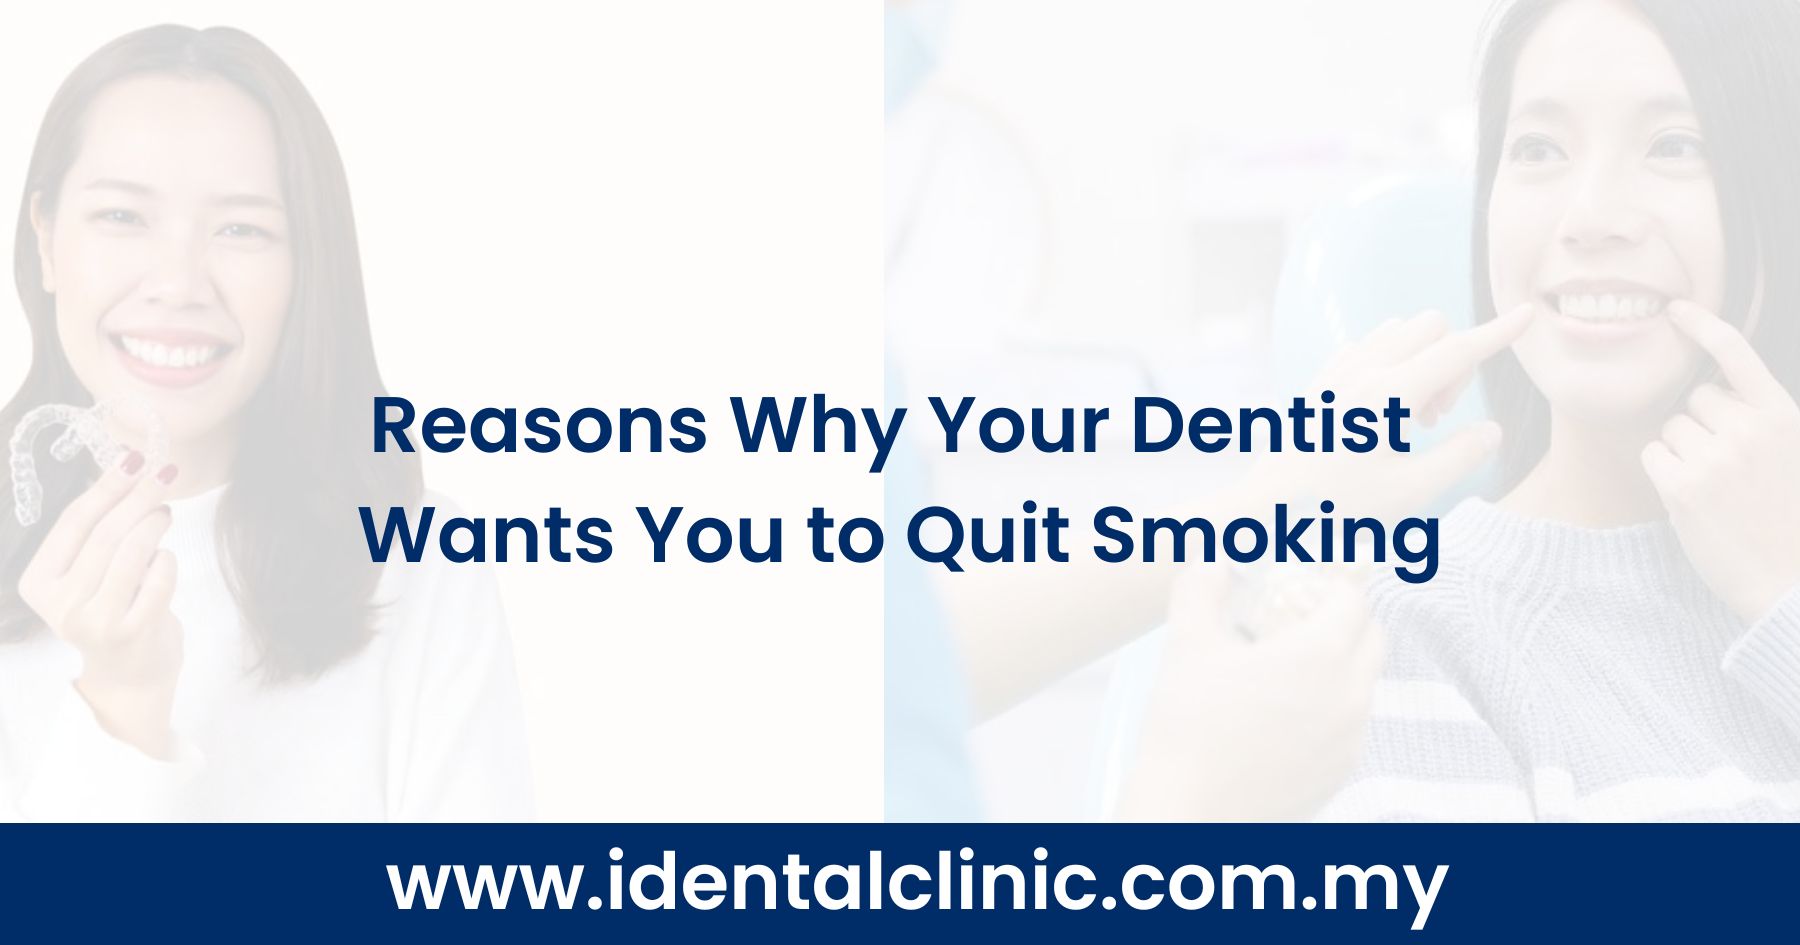 Reasons Why Your Dentist Wants You to Quit Smoking